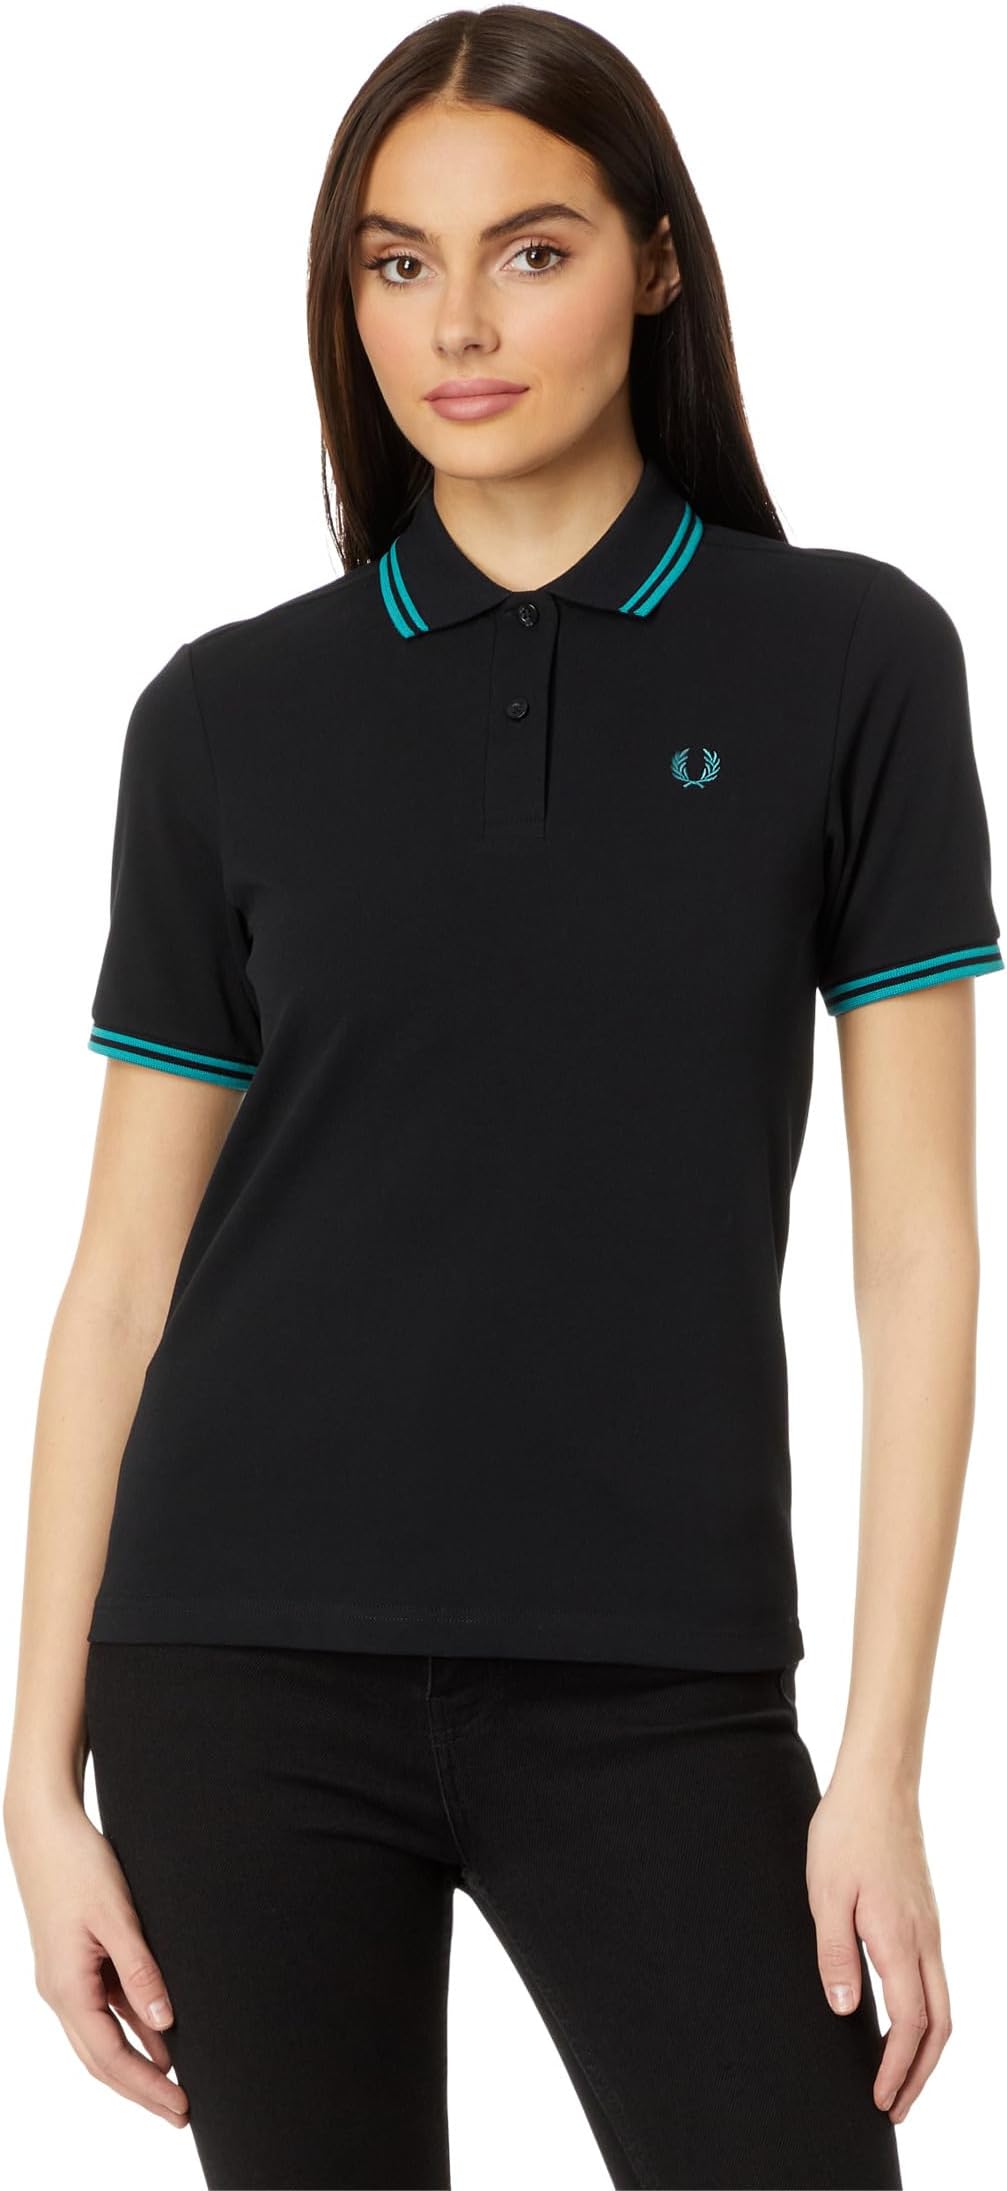 Рубашка-поло Twin Tipped Fred Perry Shirt Fred Perry, черный футболка поло fred perry twin tipped кремовый